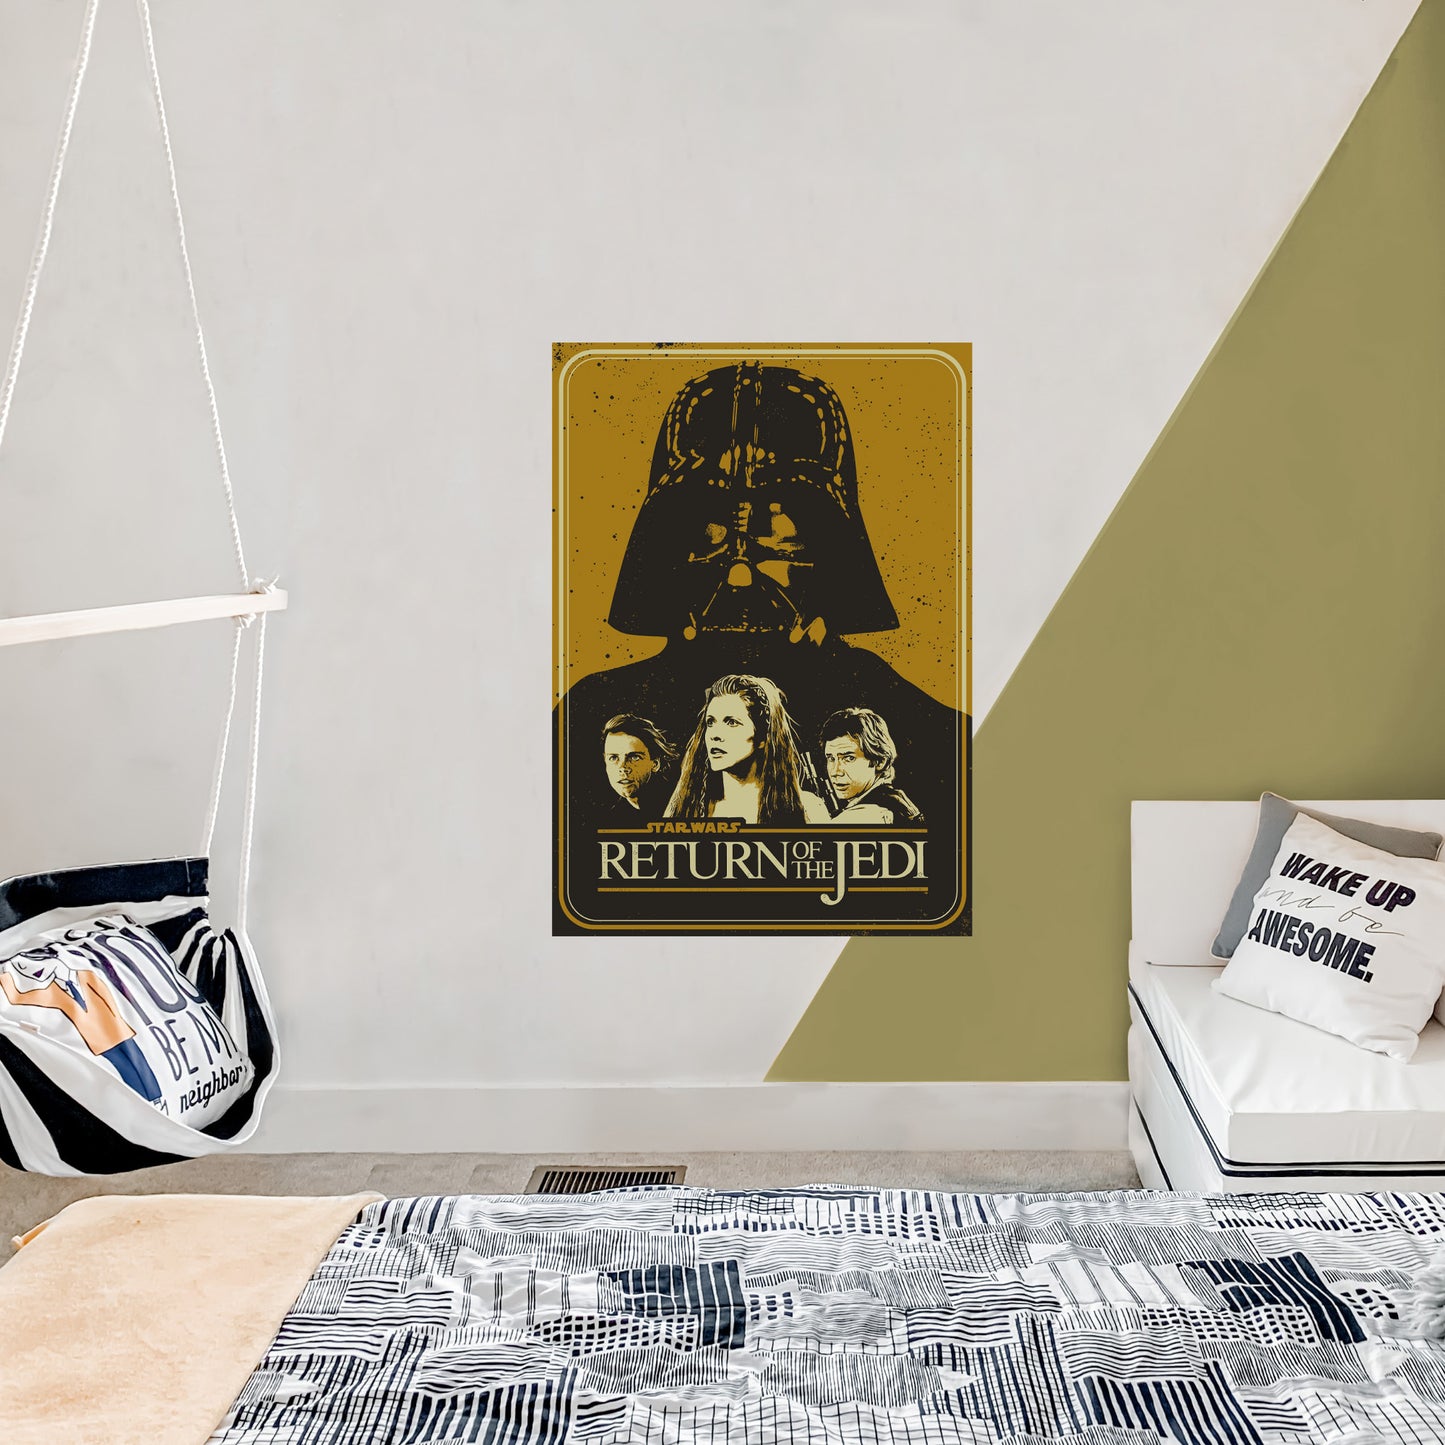 Return of the Jedi 40th: Sepia Tone Movie Poster - Officially Licensed Star Wars Removable Adhesive Decal